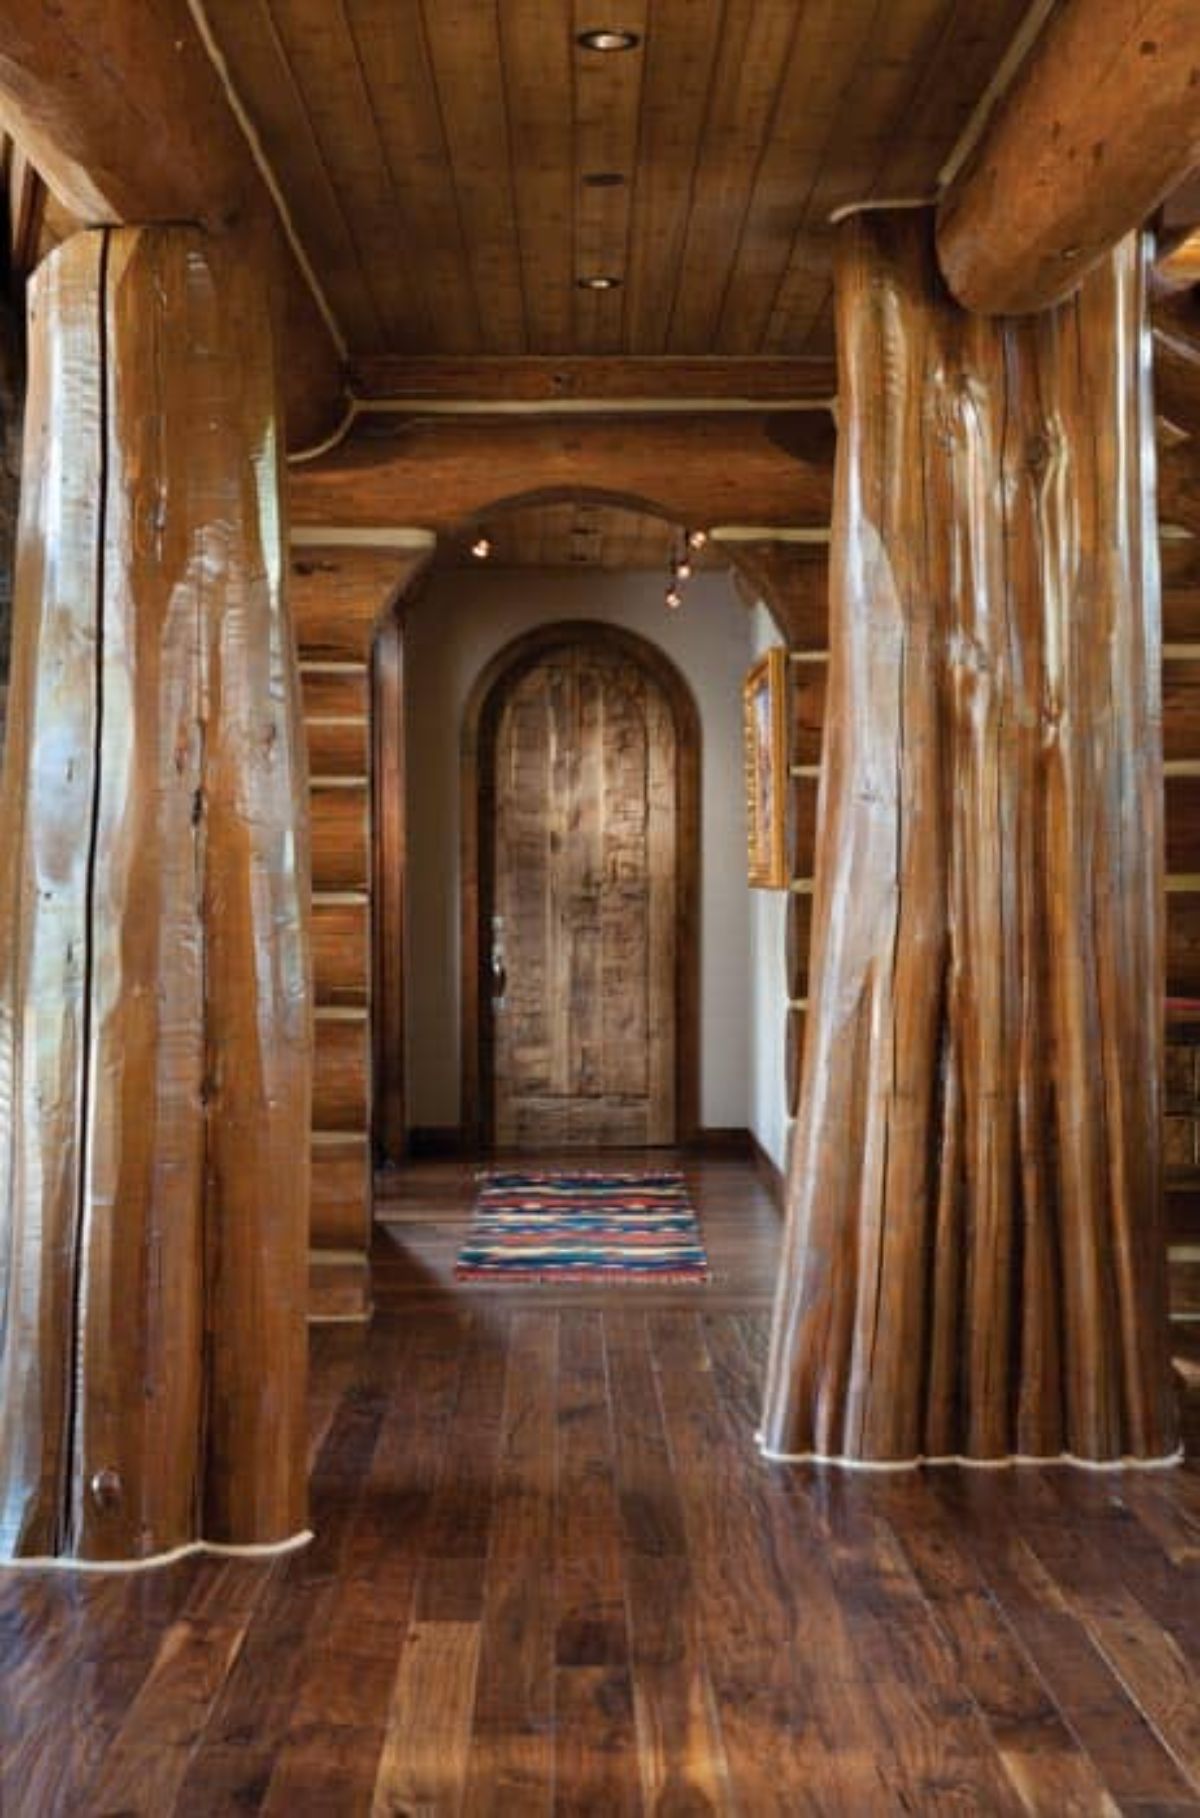 arched wood door at end of hall with log trunks in hall as beams